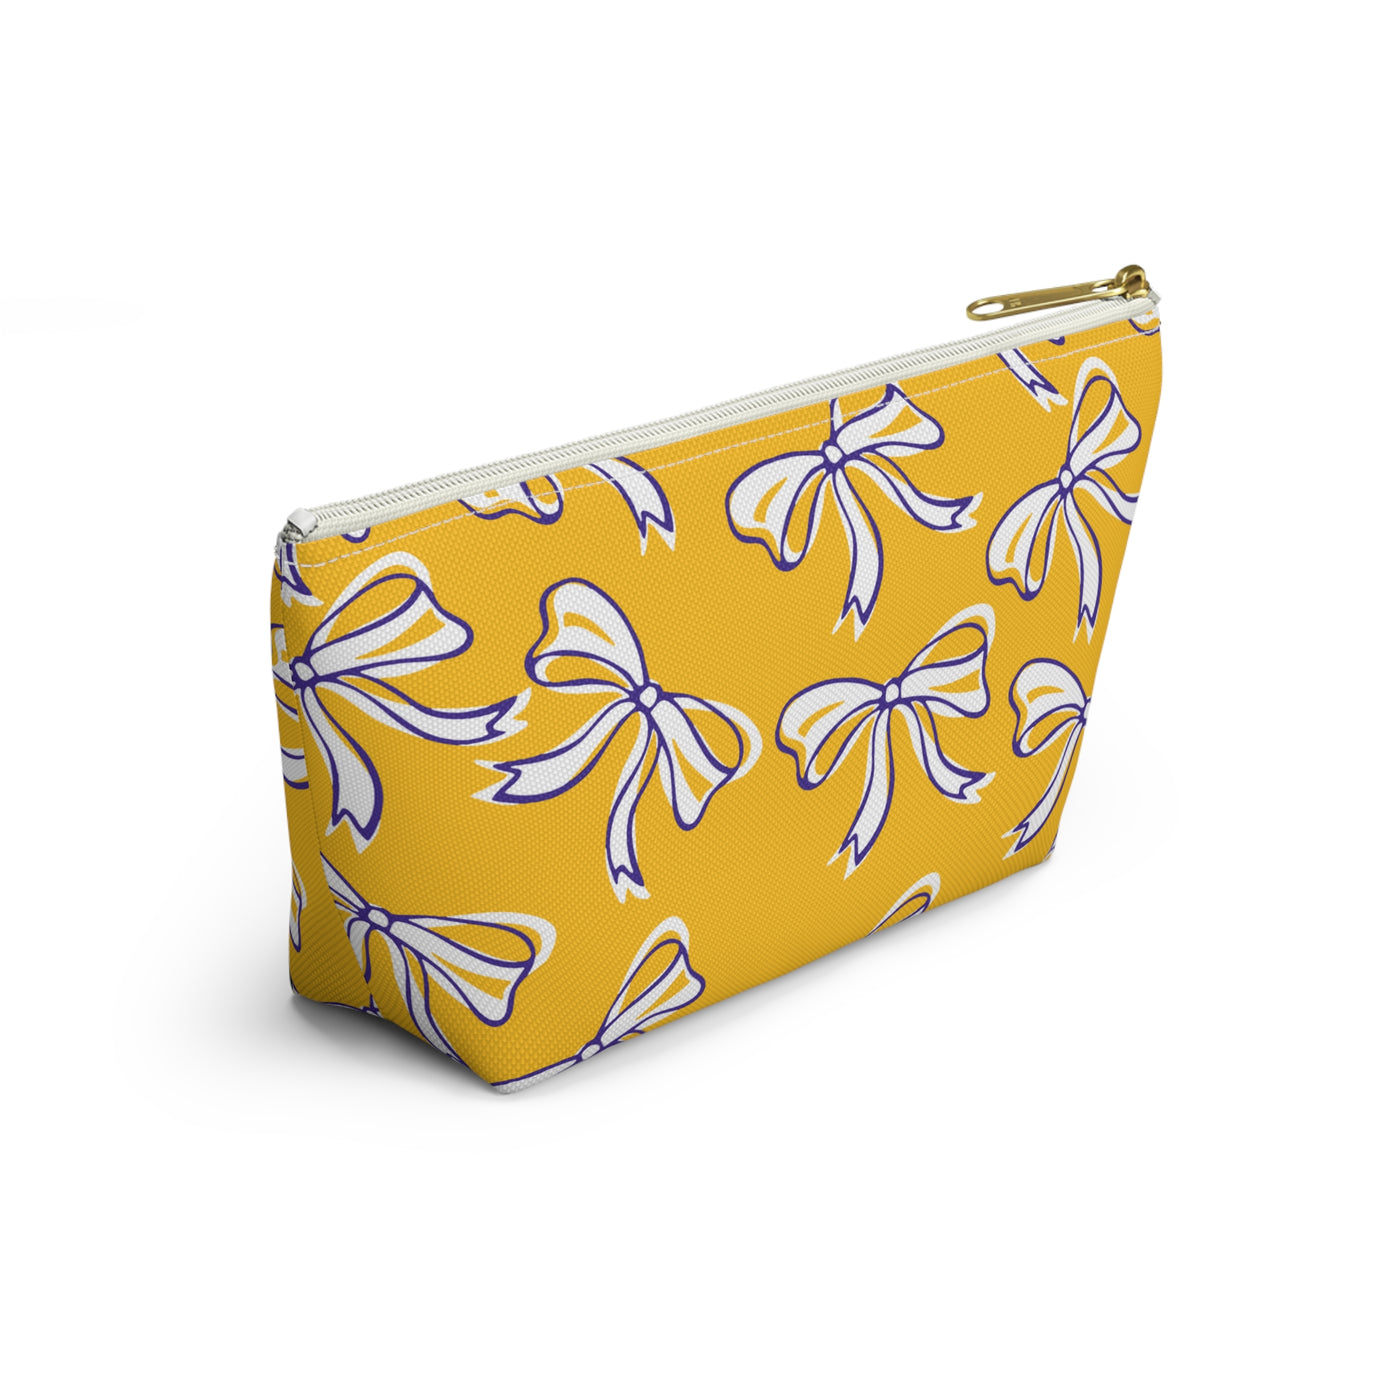 Trendy Bow Makeup Bag - Graduation Gift, Bed Party Gift, Acceptance Gift, College Gift, LSU, LSU Tigers, Purple and Gold